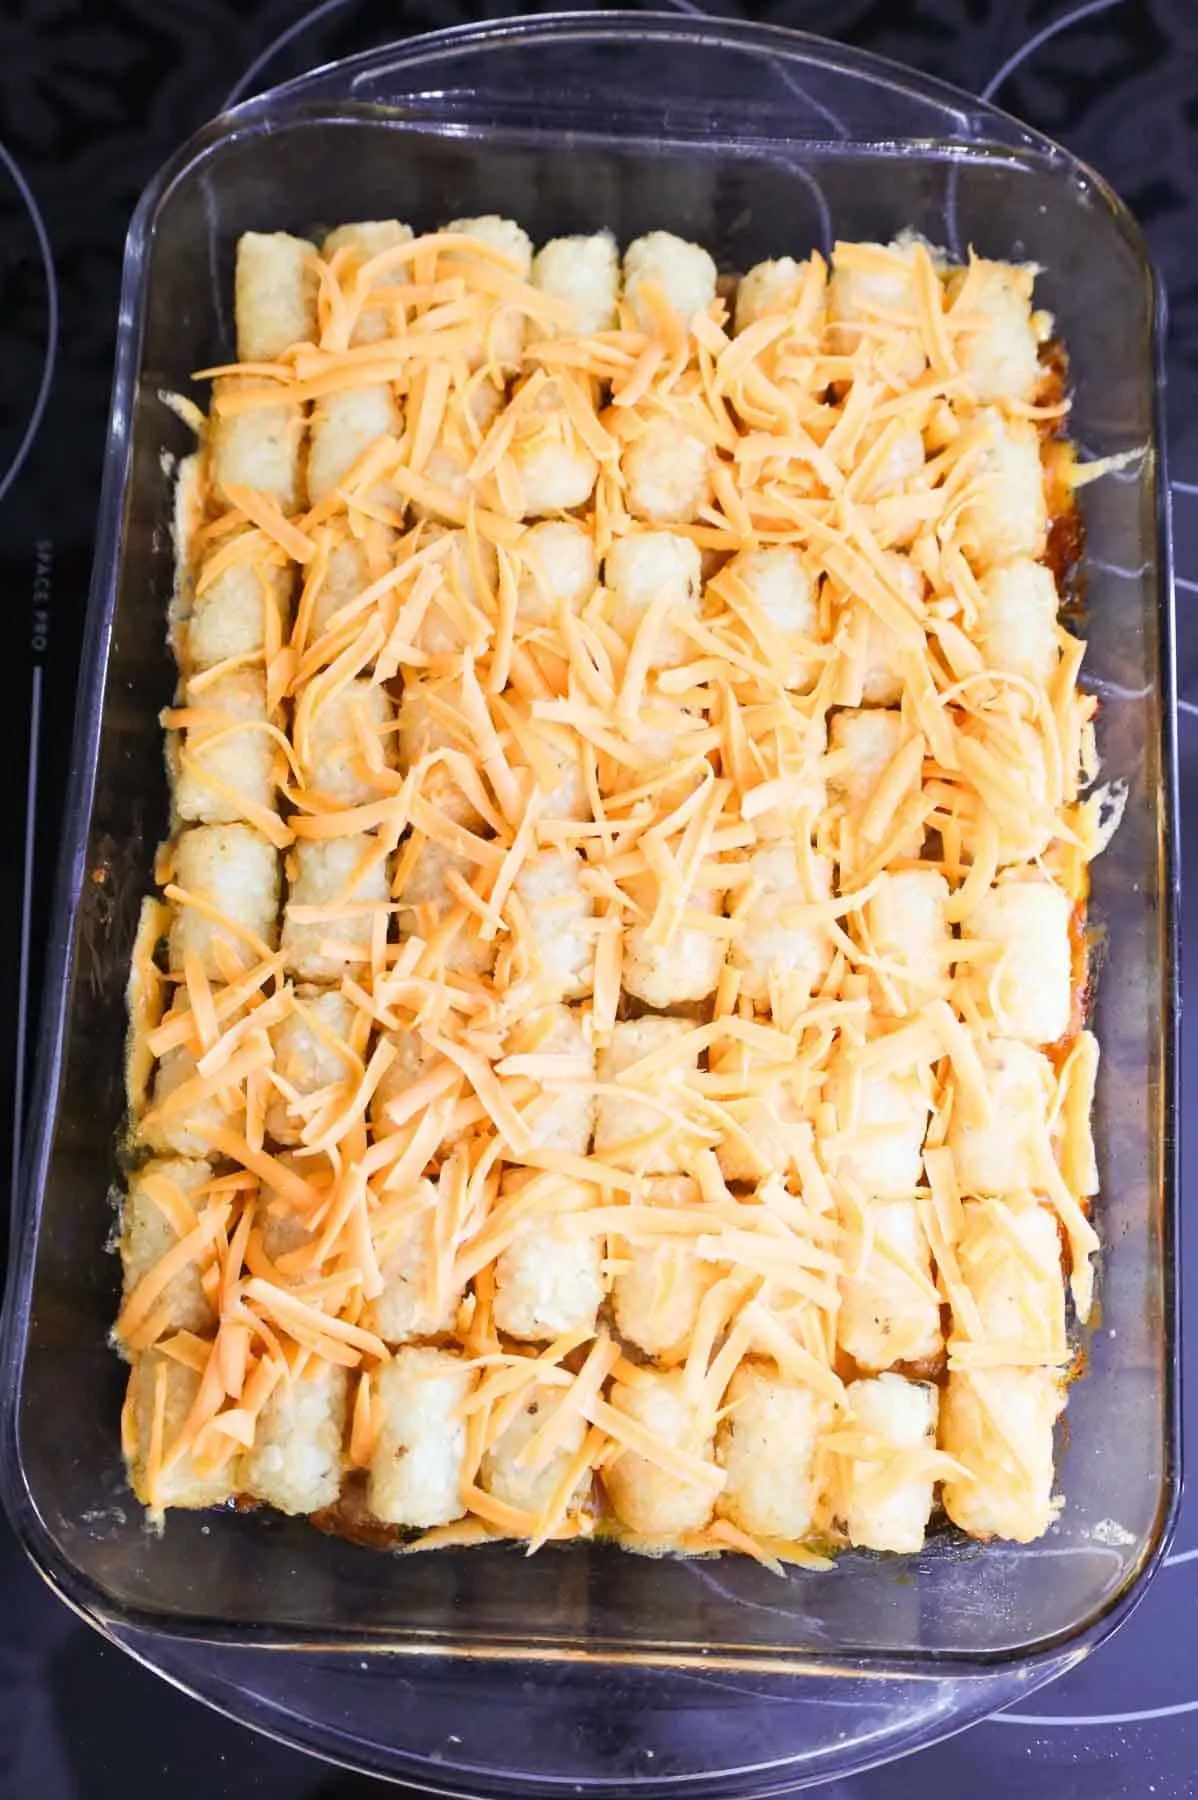 shredded cheddar cheese on top of tater tot casserole